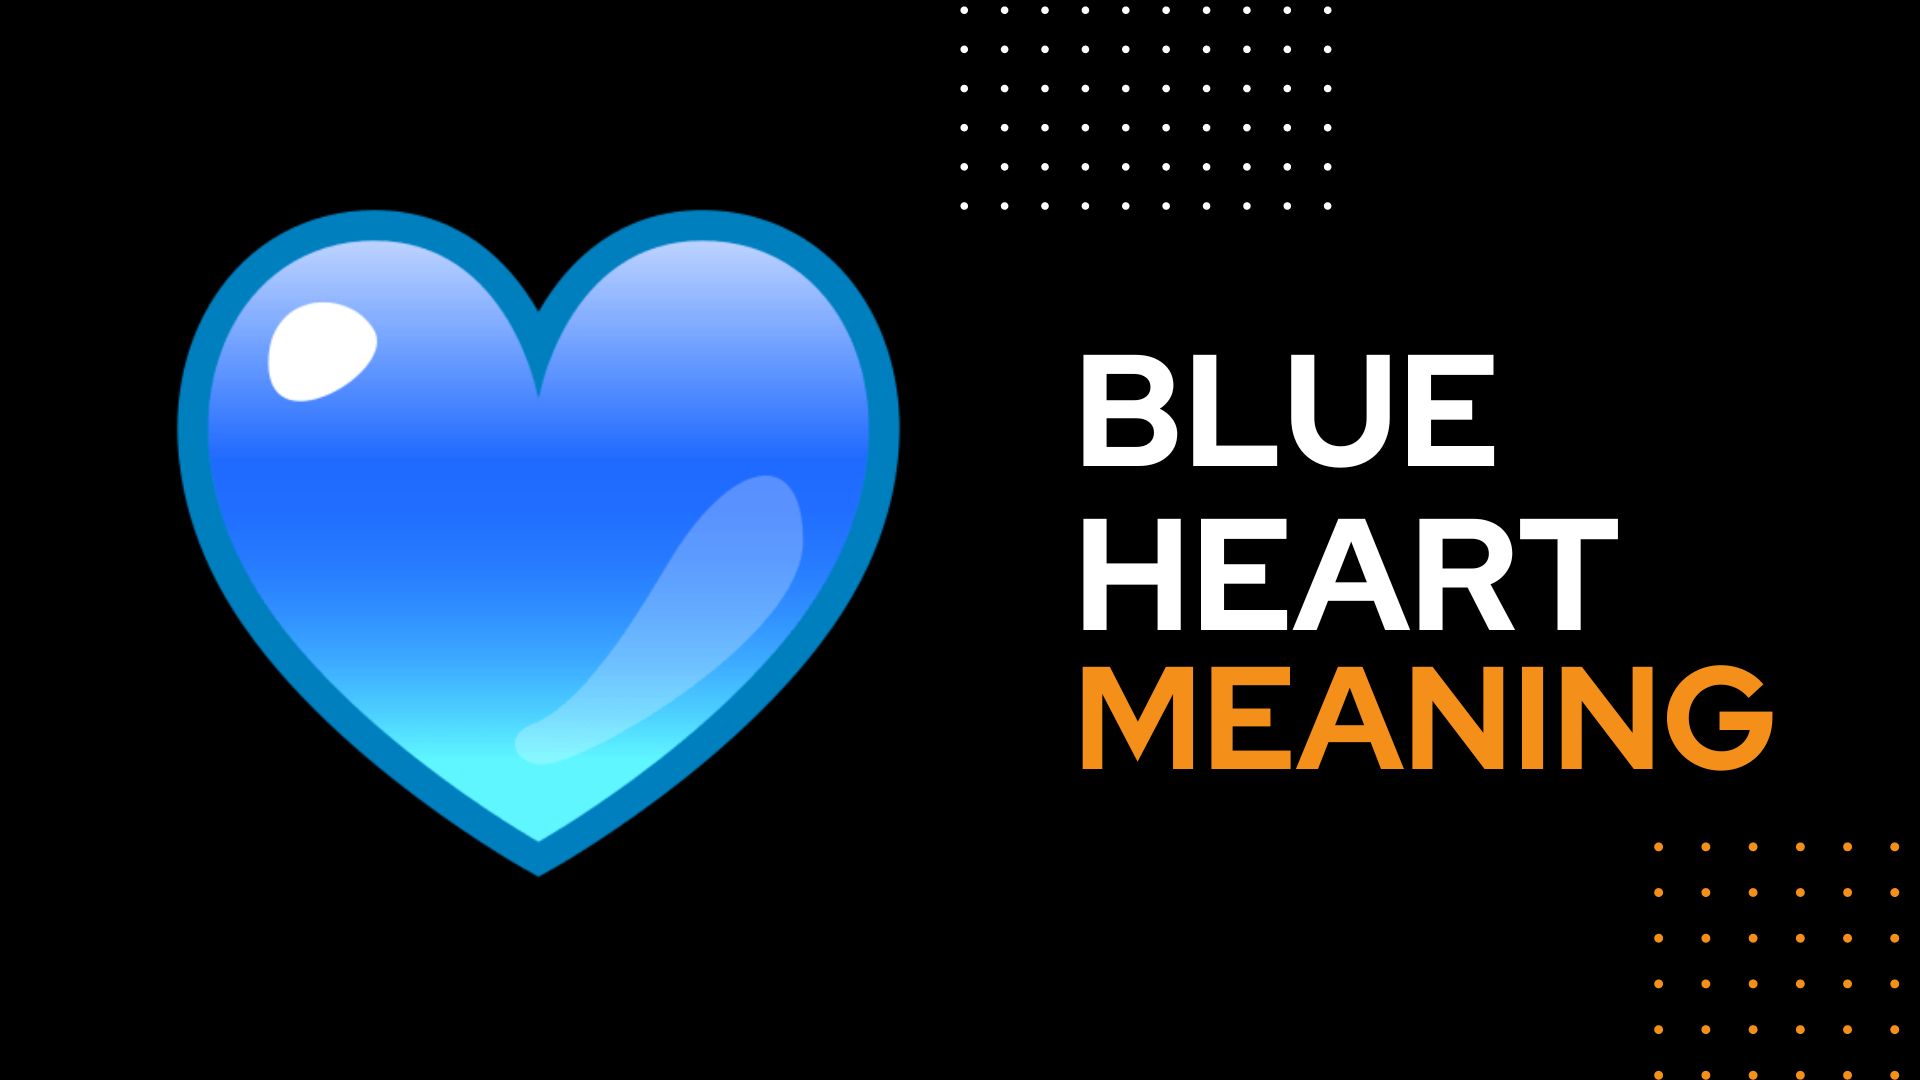 Blue Heart meaning